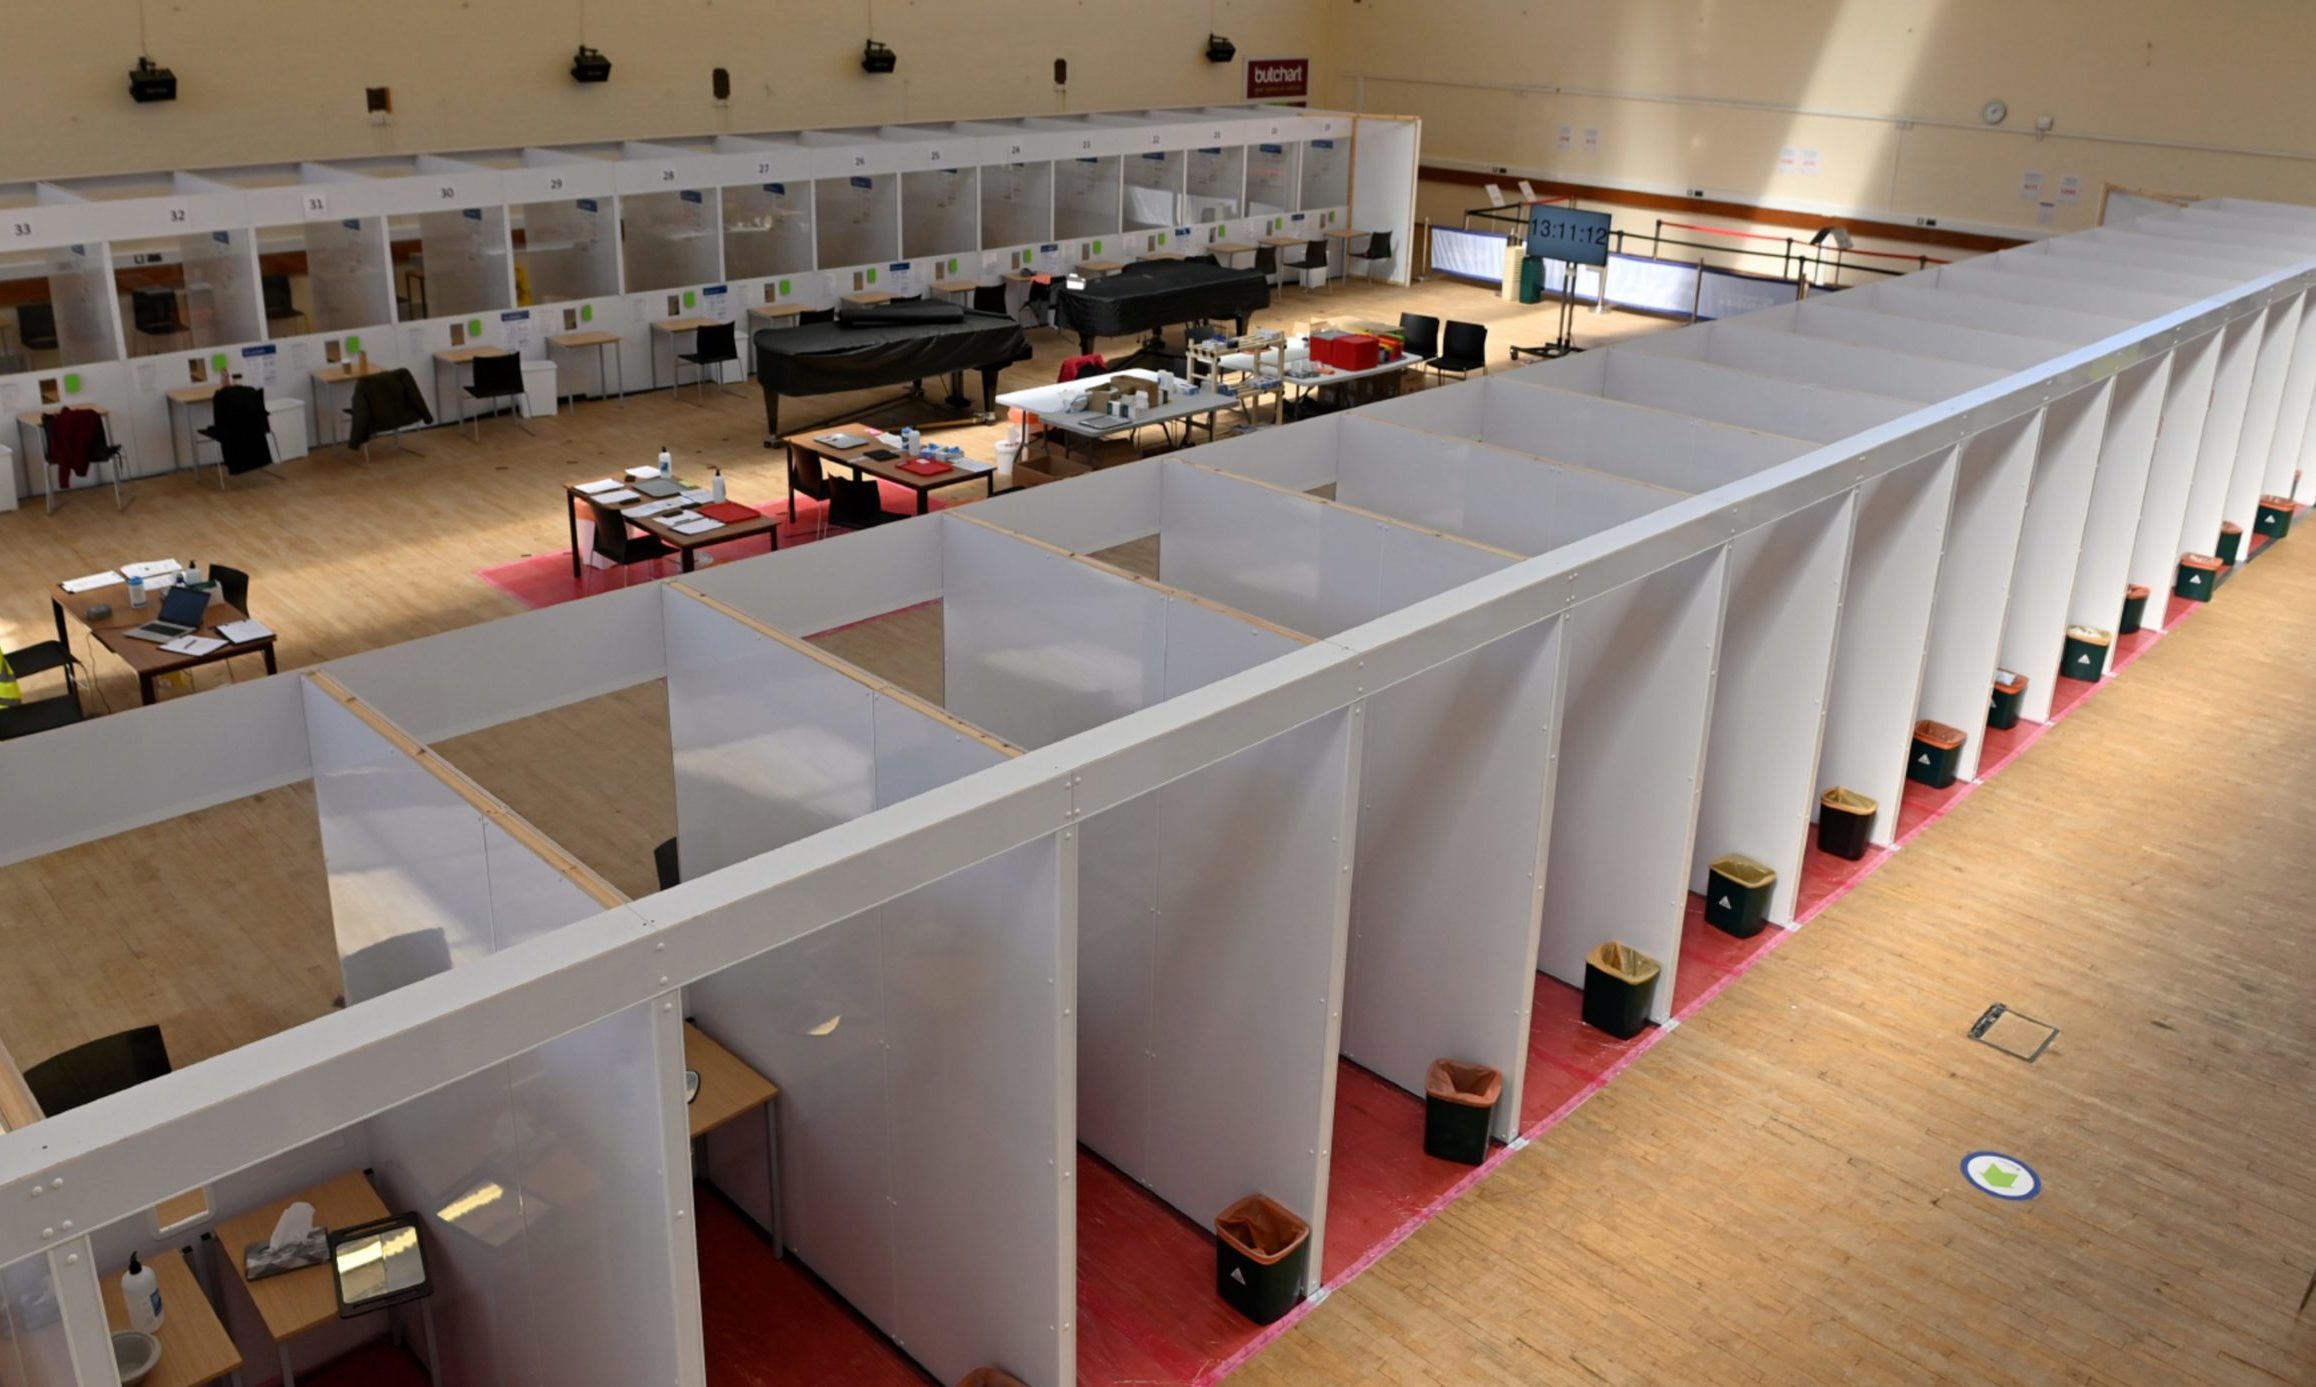 The Butchart Centre facility has 36 booths for Covid testing.